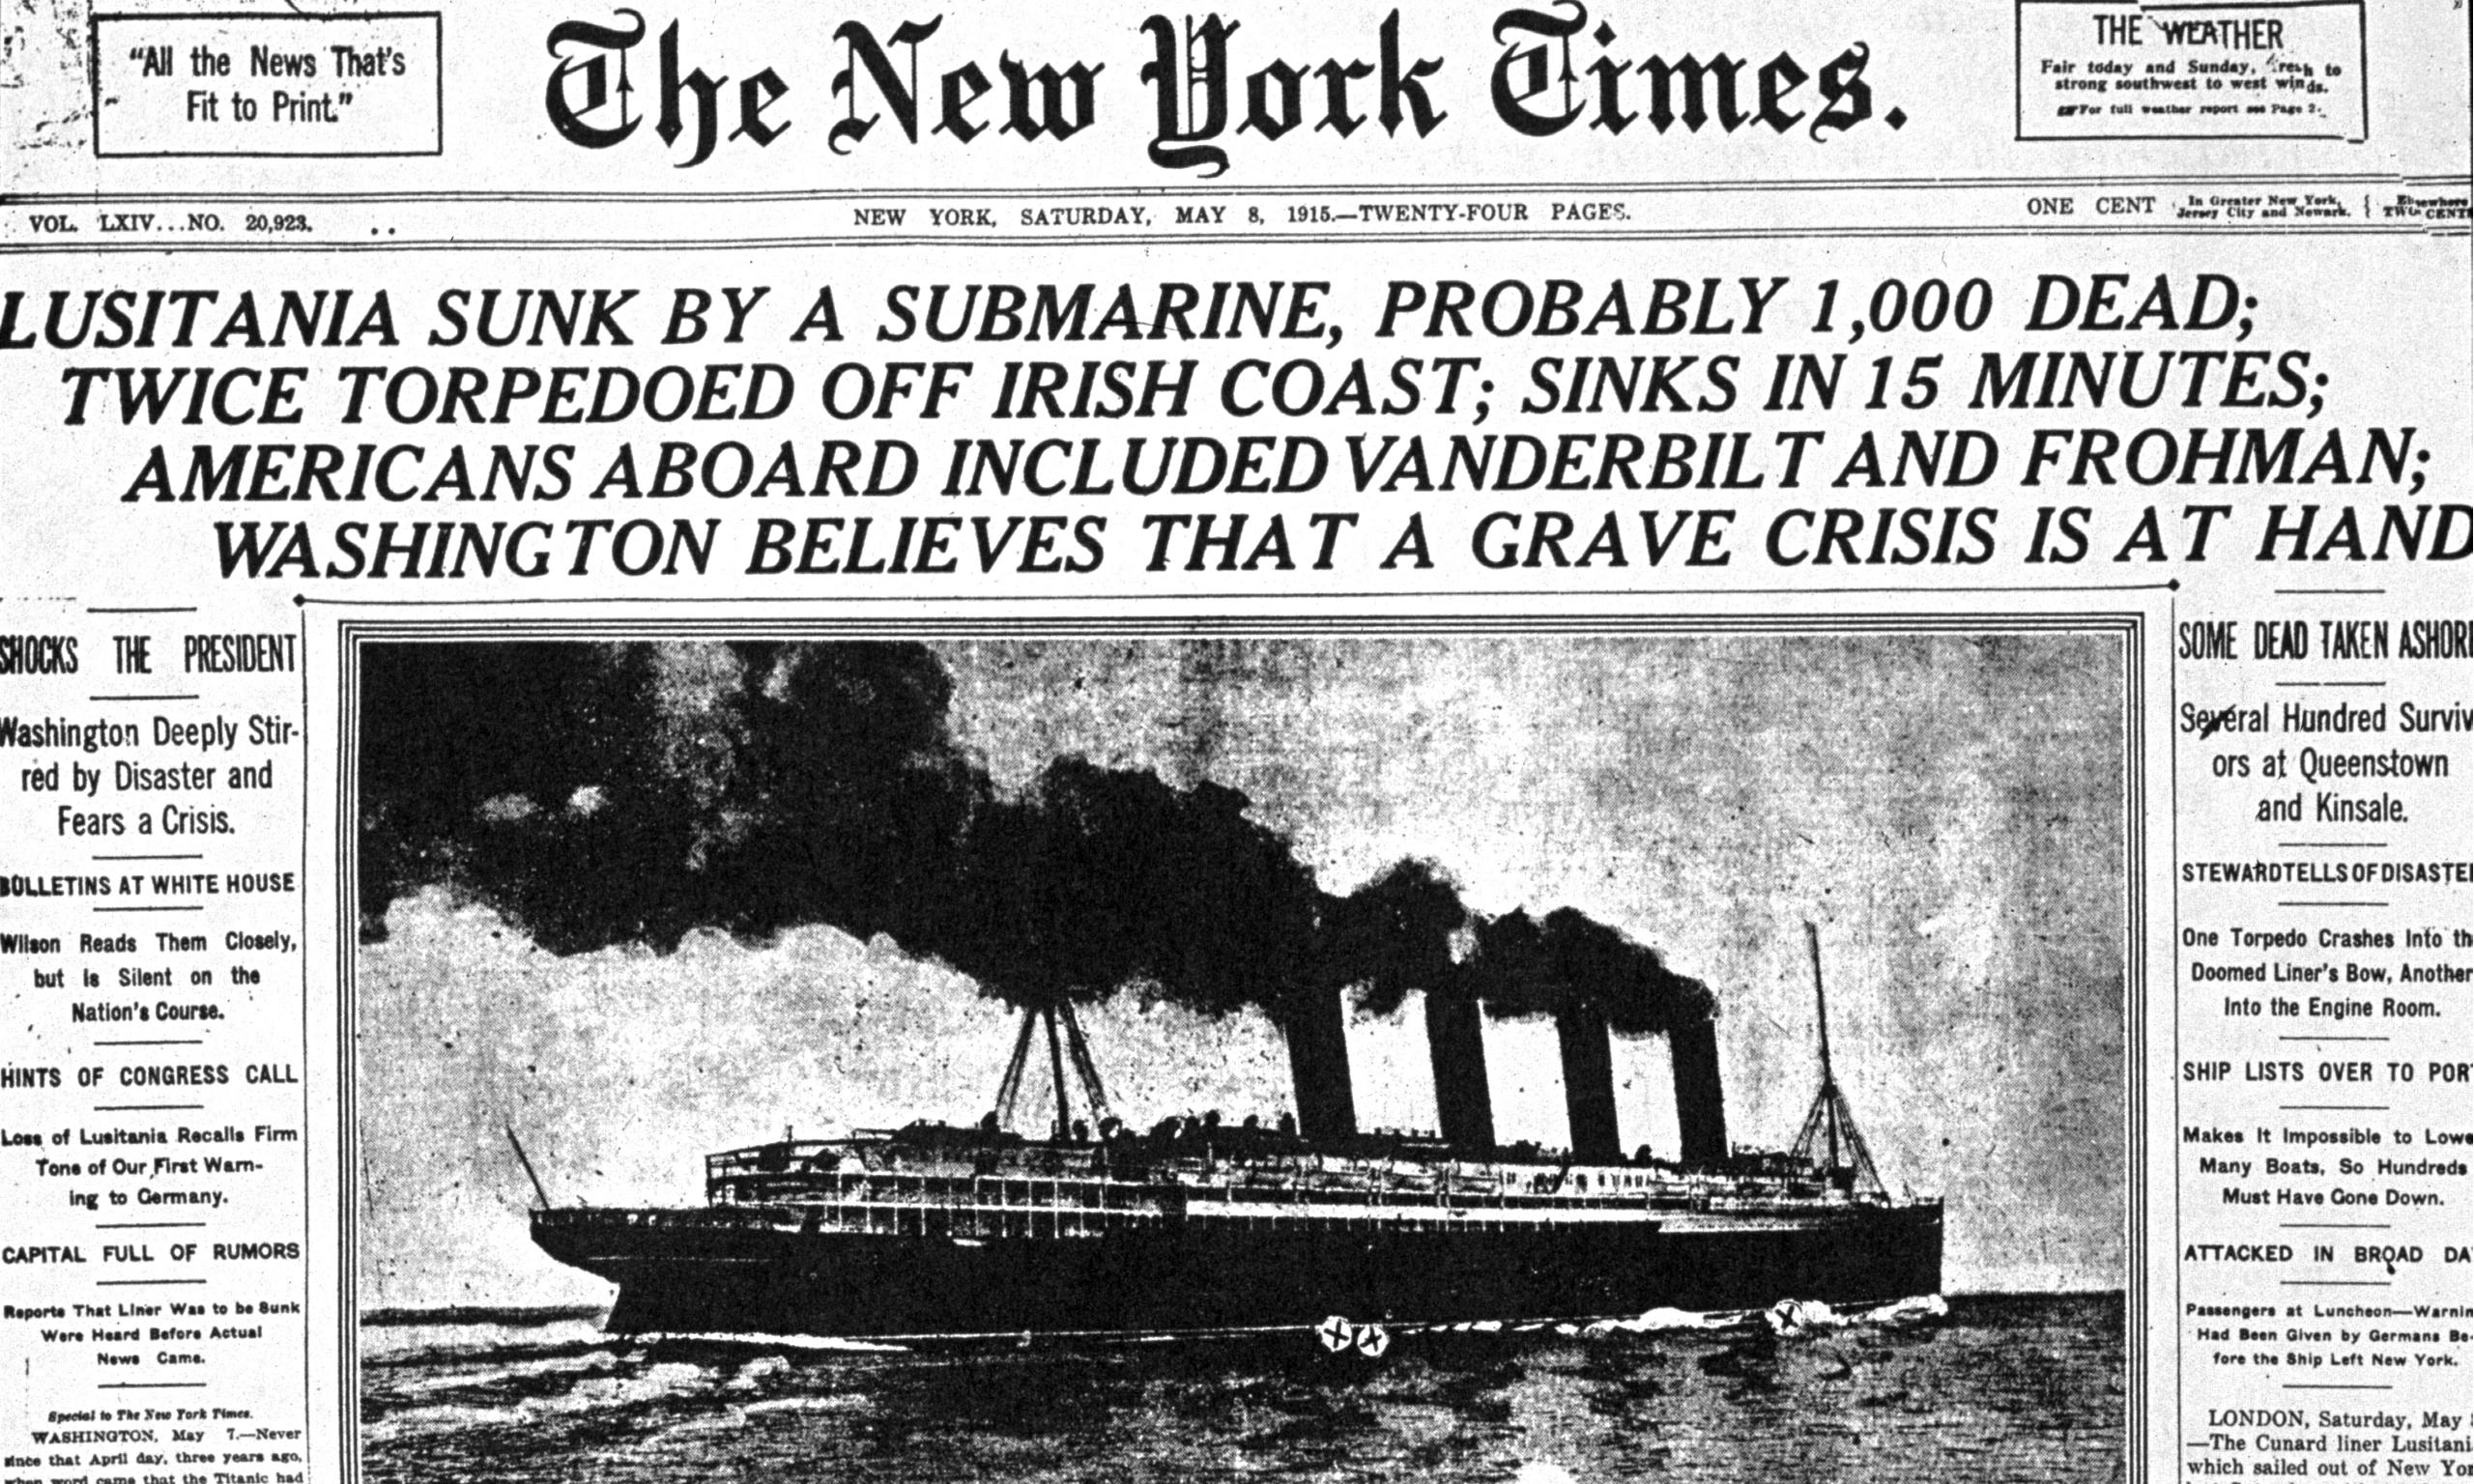 New York Times front page about the Lusitania